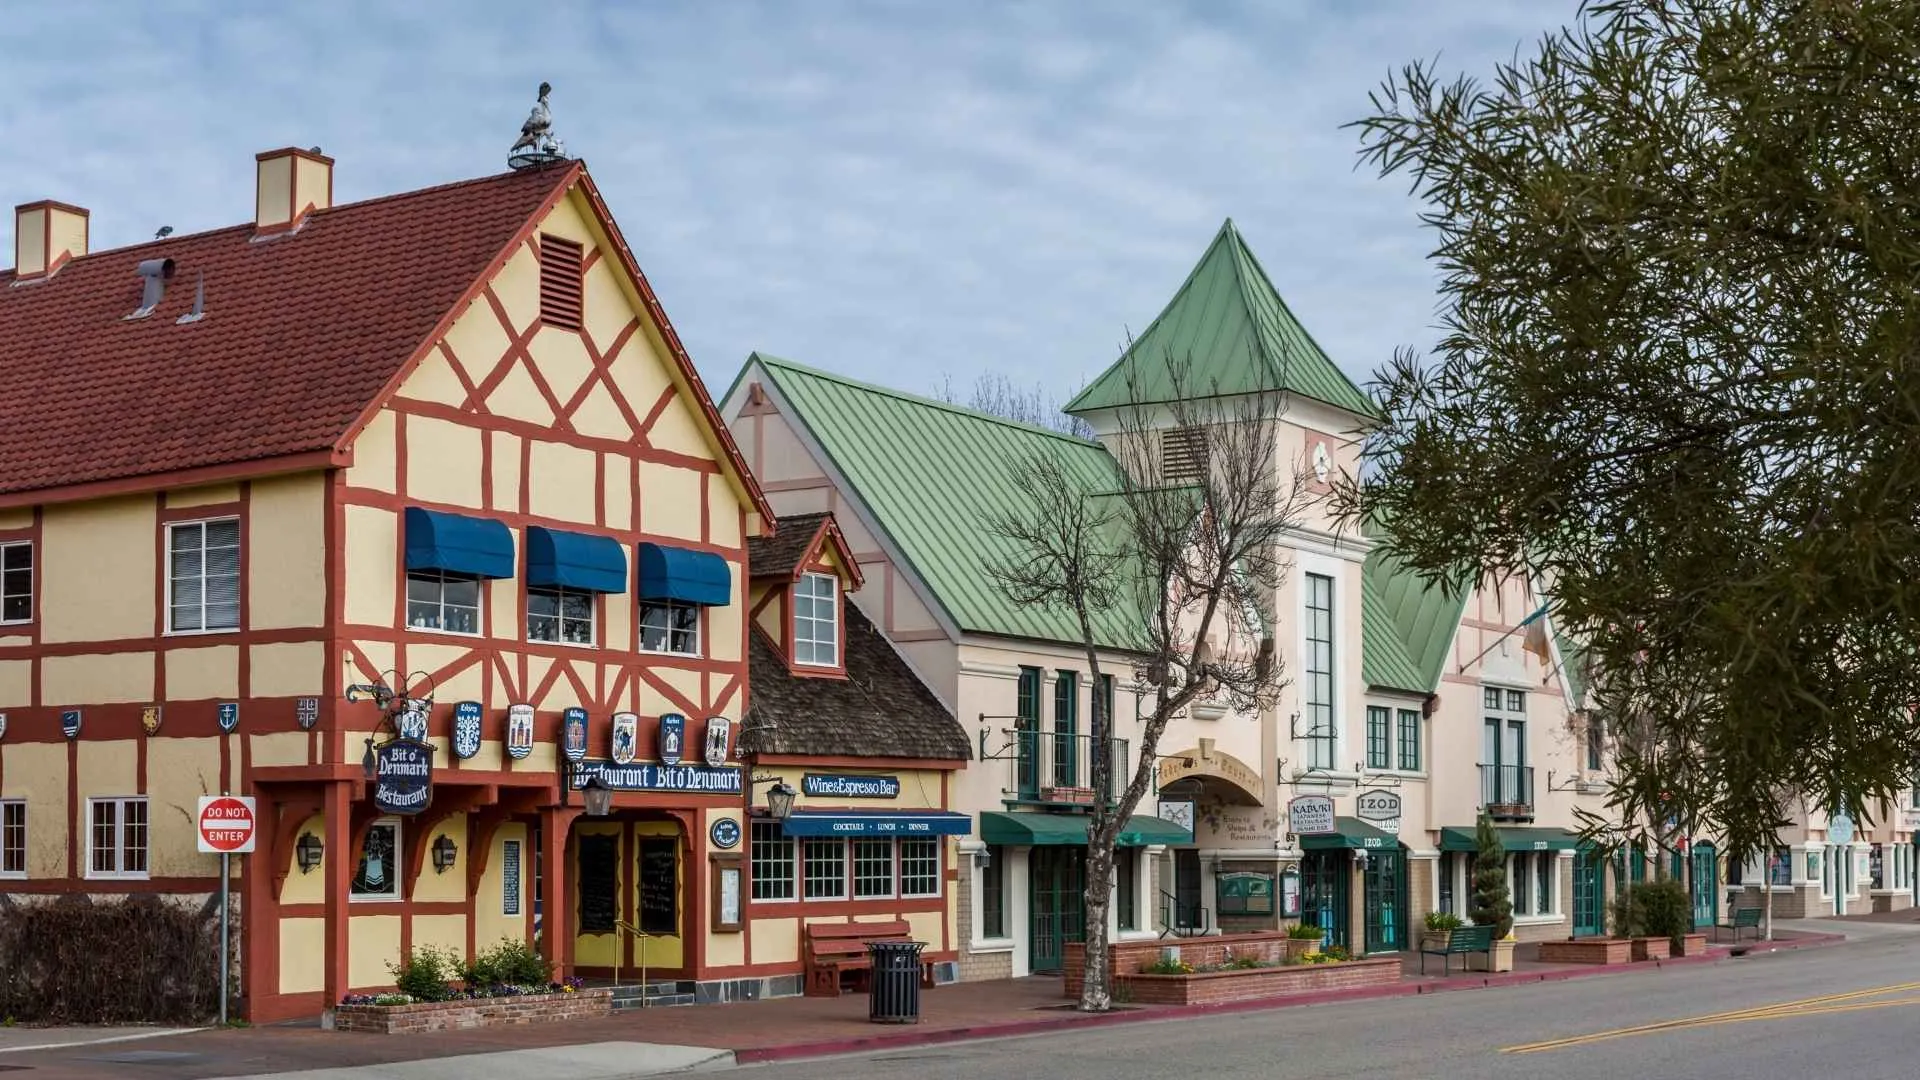 Solvang California road trip with friends